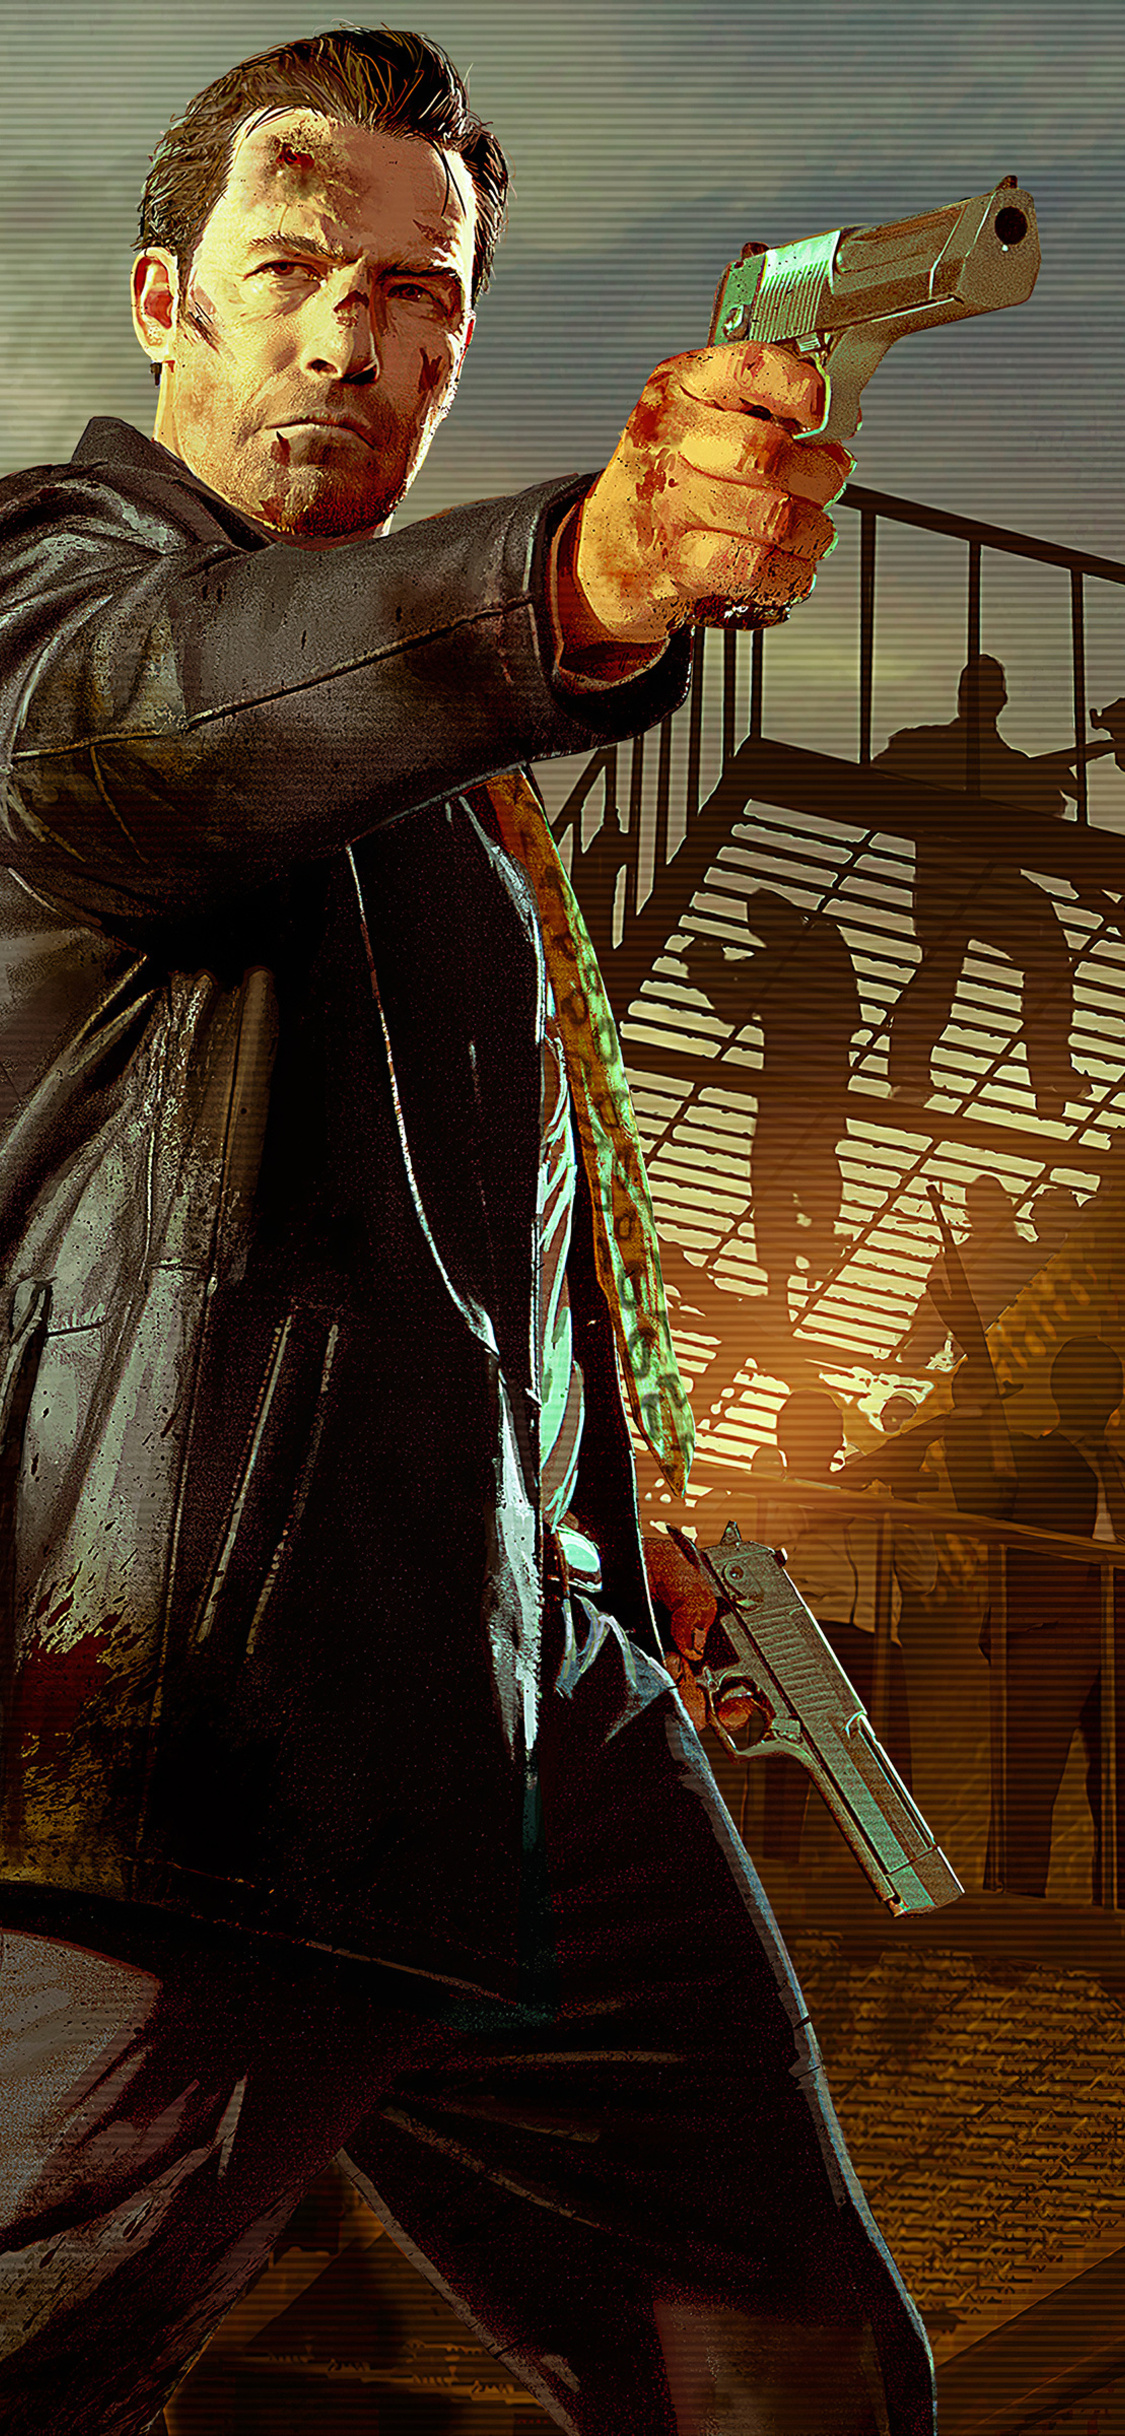 Download Max Payne Mobile on Android & iOS